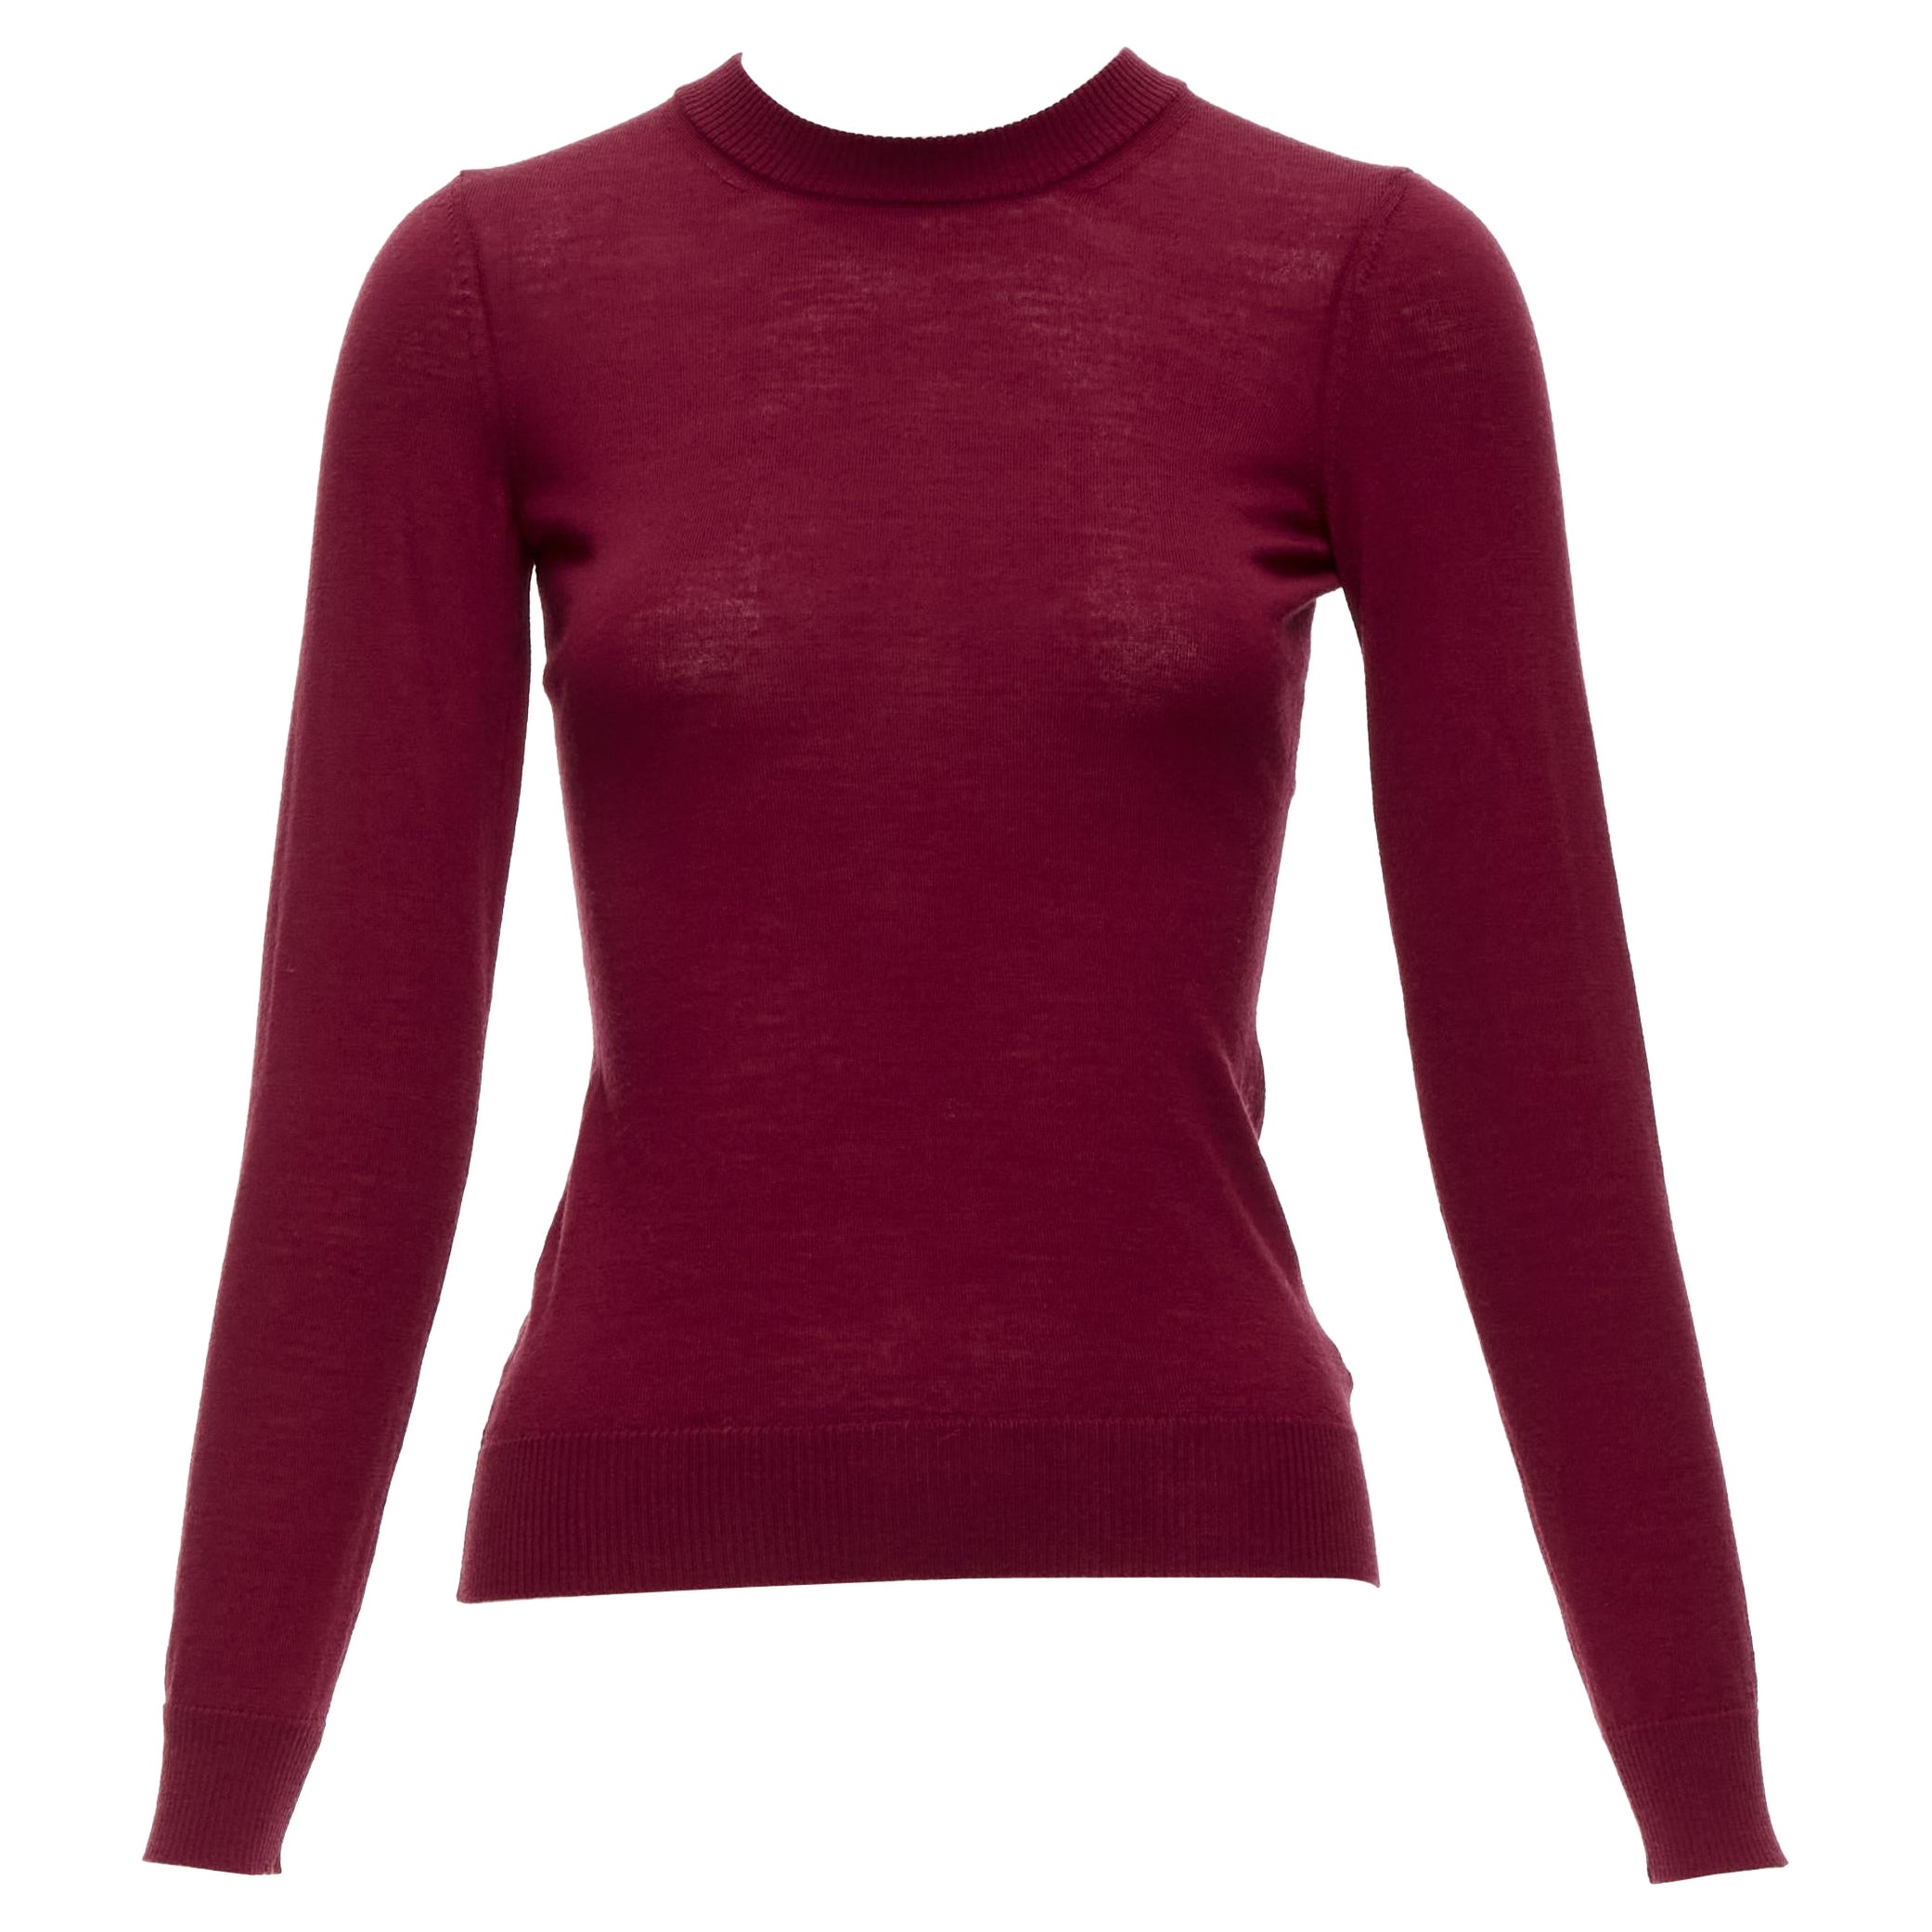 ALAIA 100% virgin wool dark red long sleeve crew neck sweater FR36 S For Sale